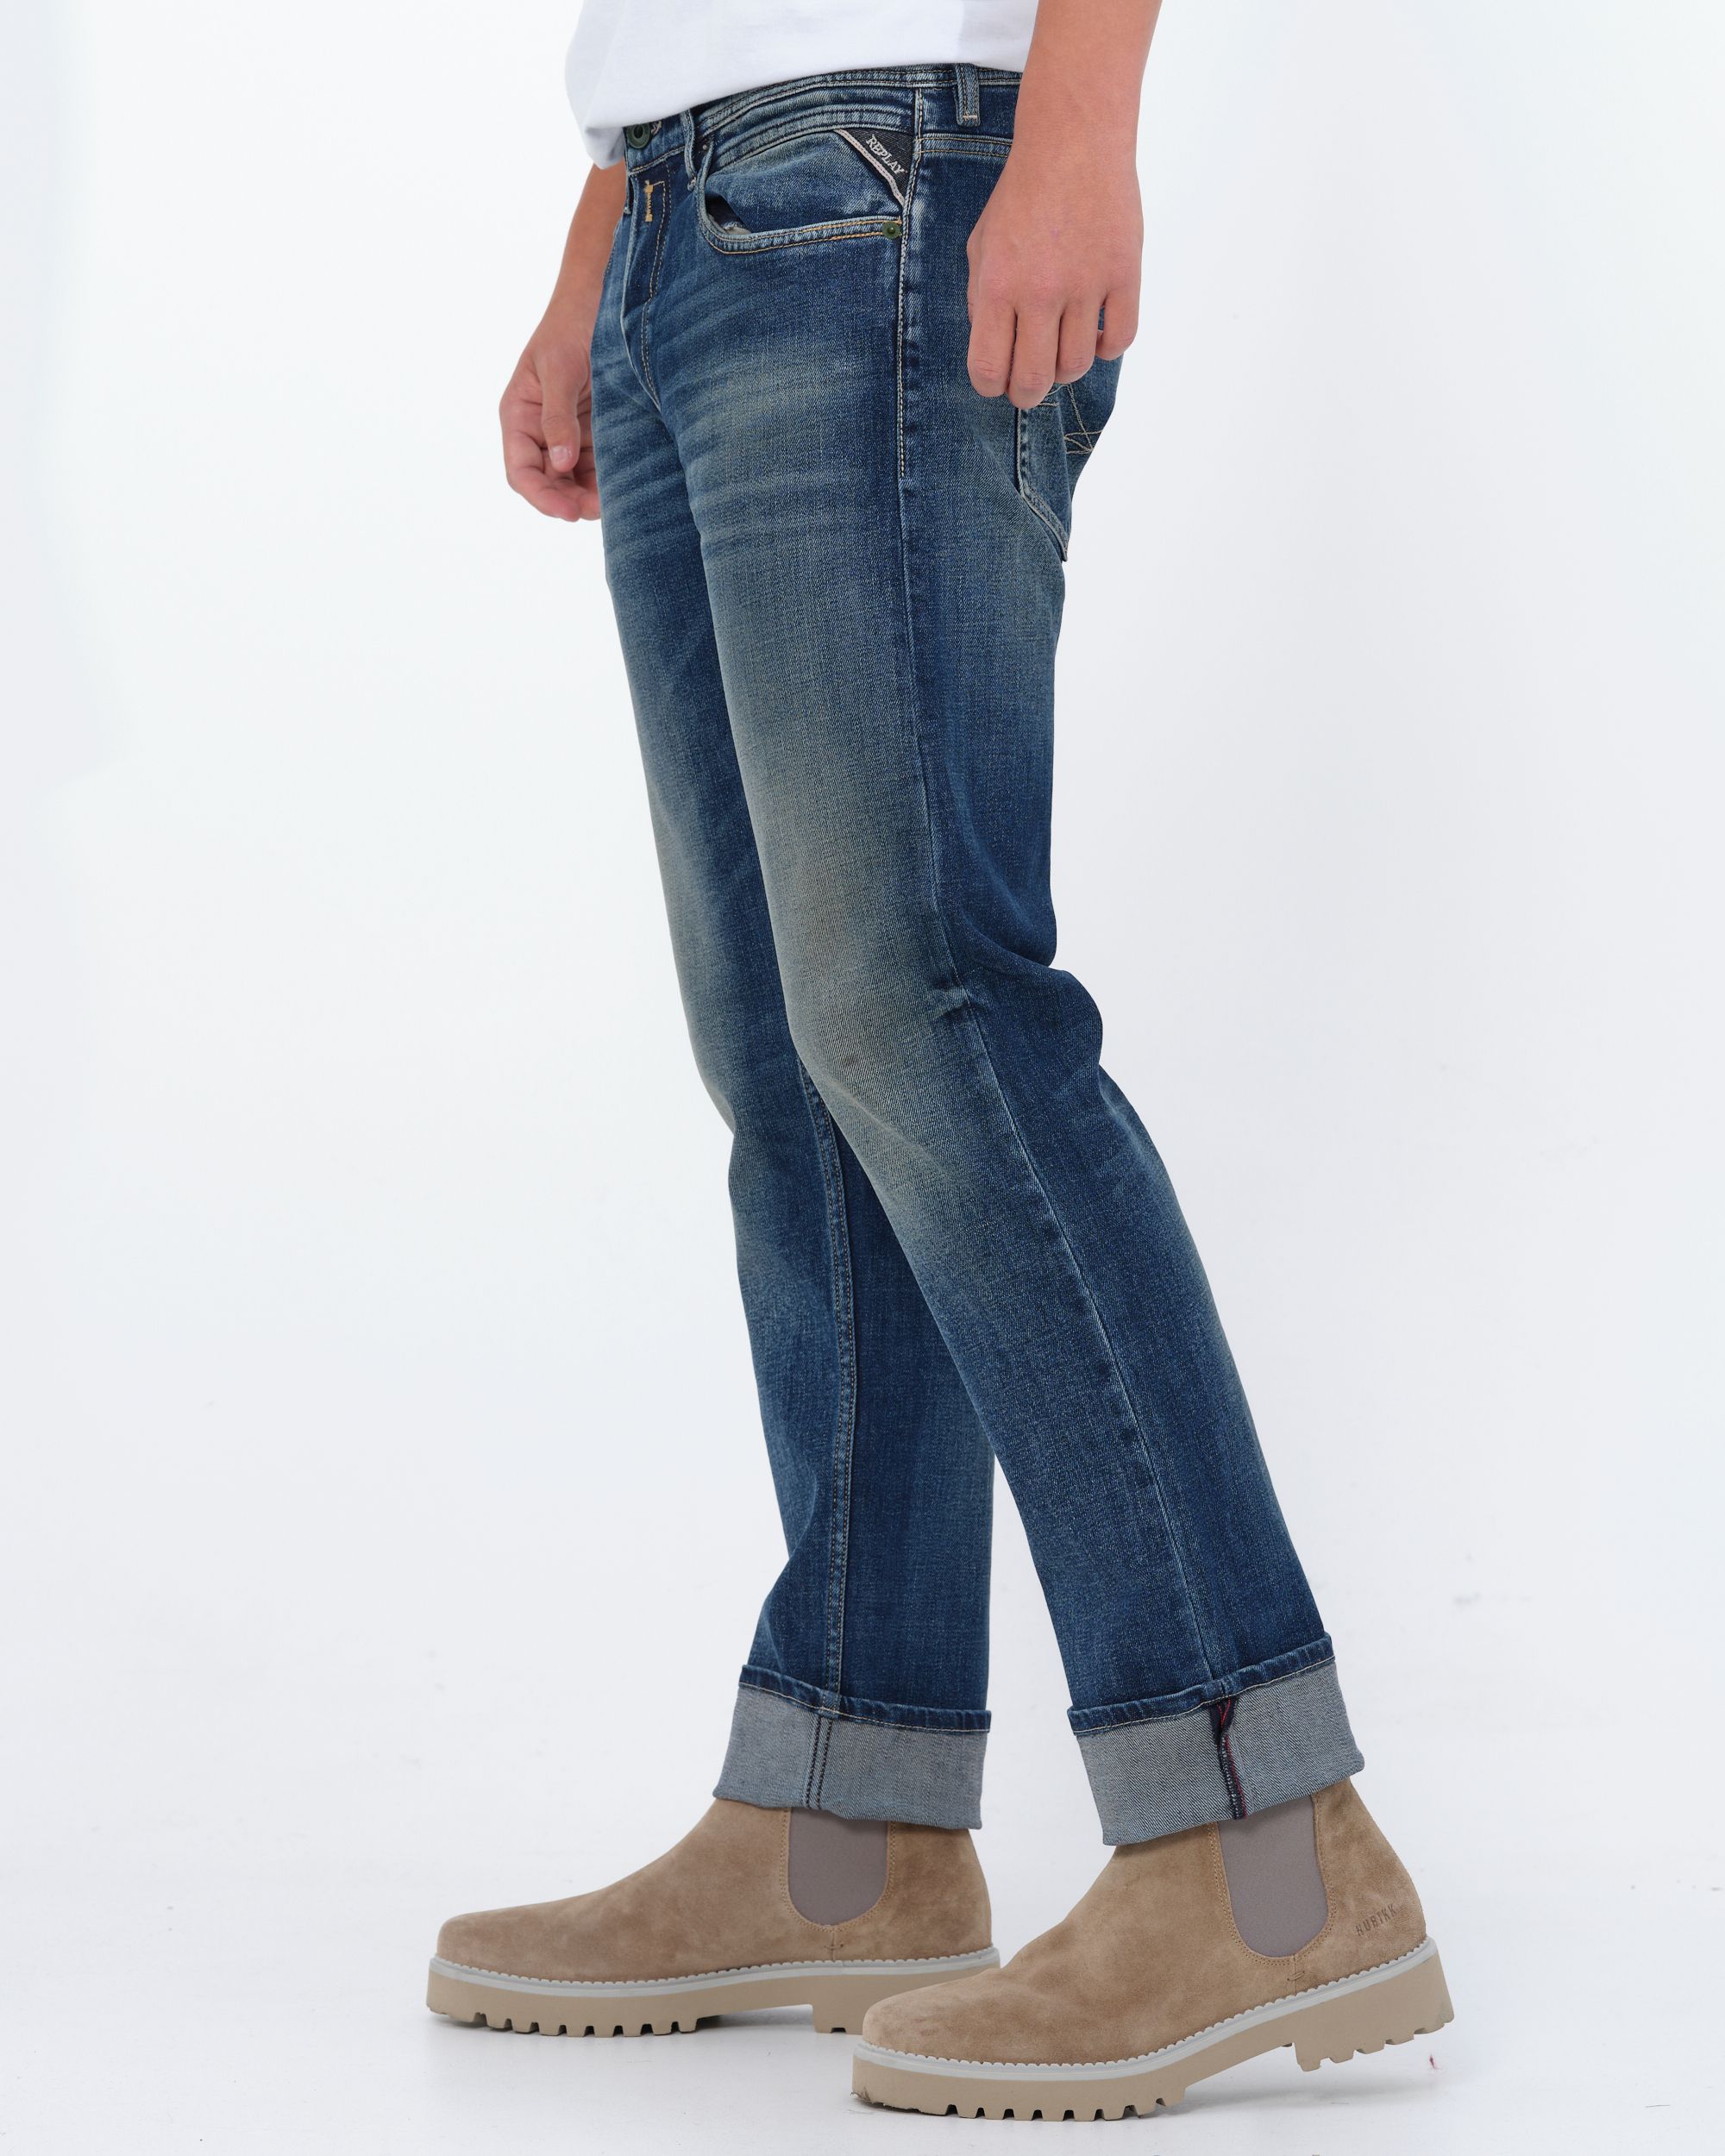 Replay Grover Jeans Blauw 081757-001-30/32